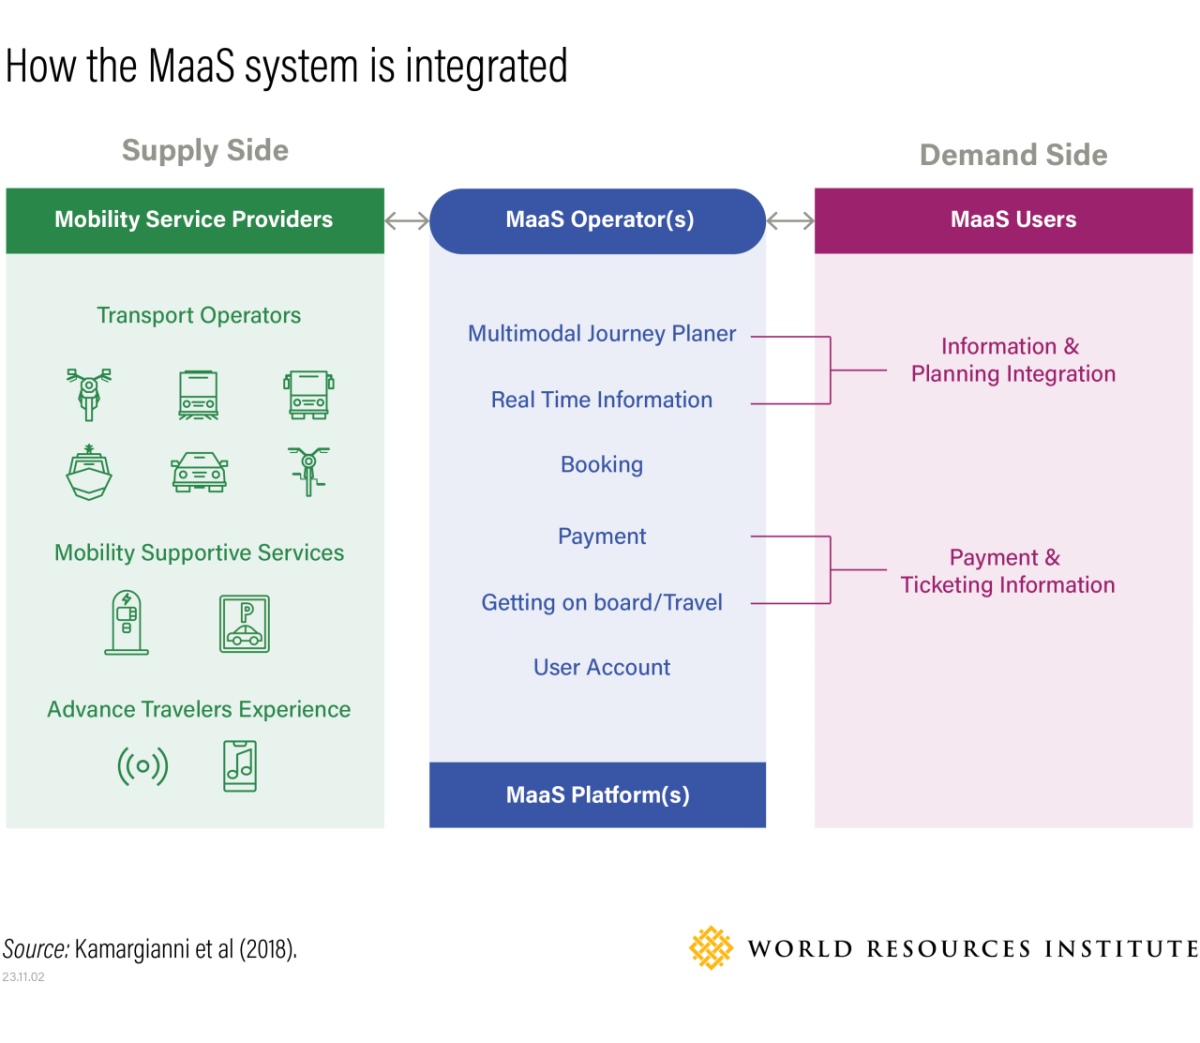 How the MaaS system is integrated graphic